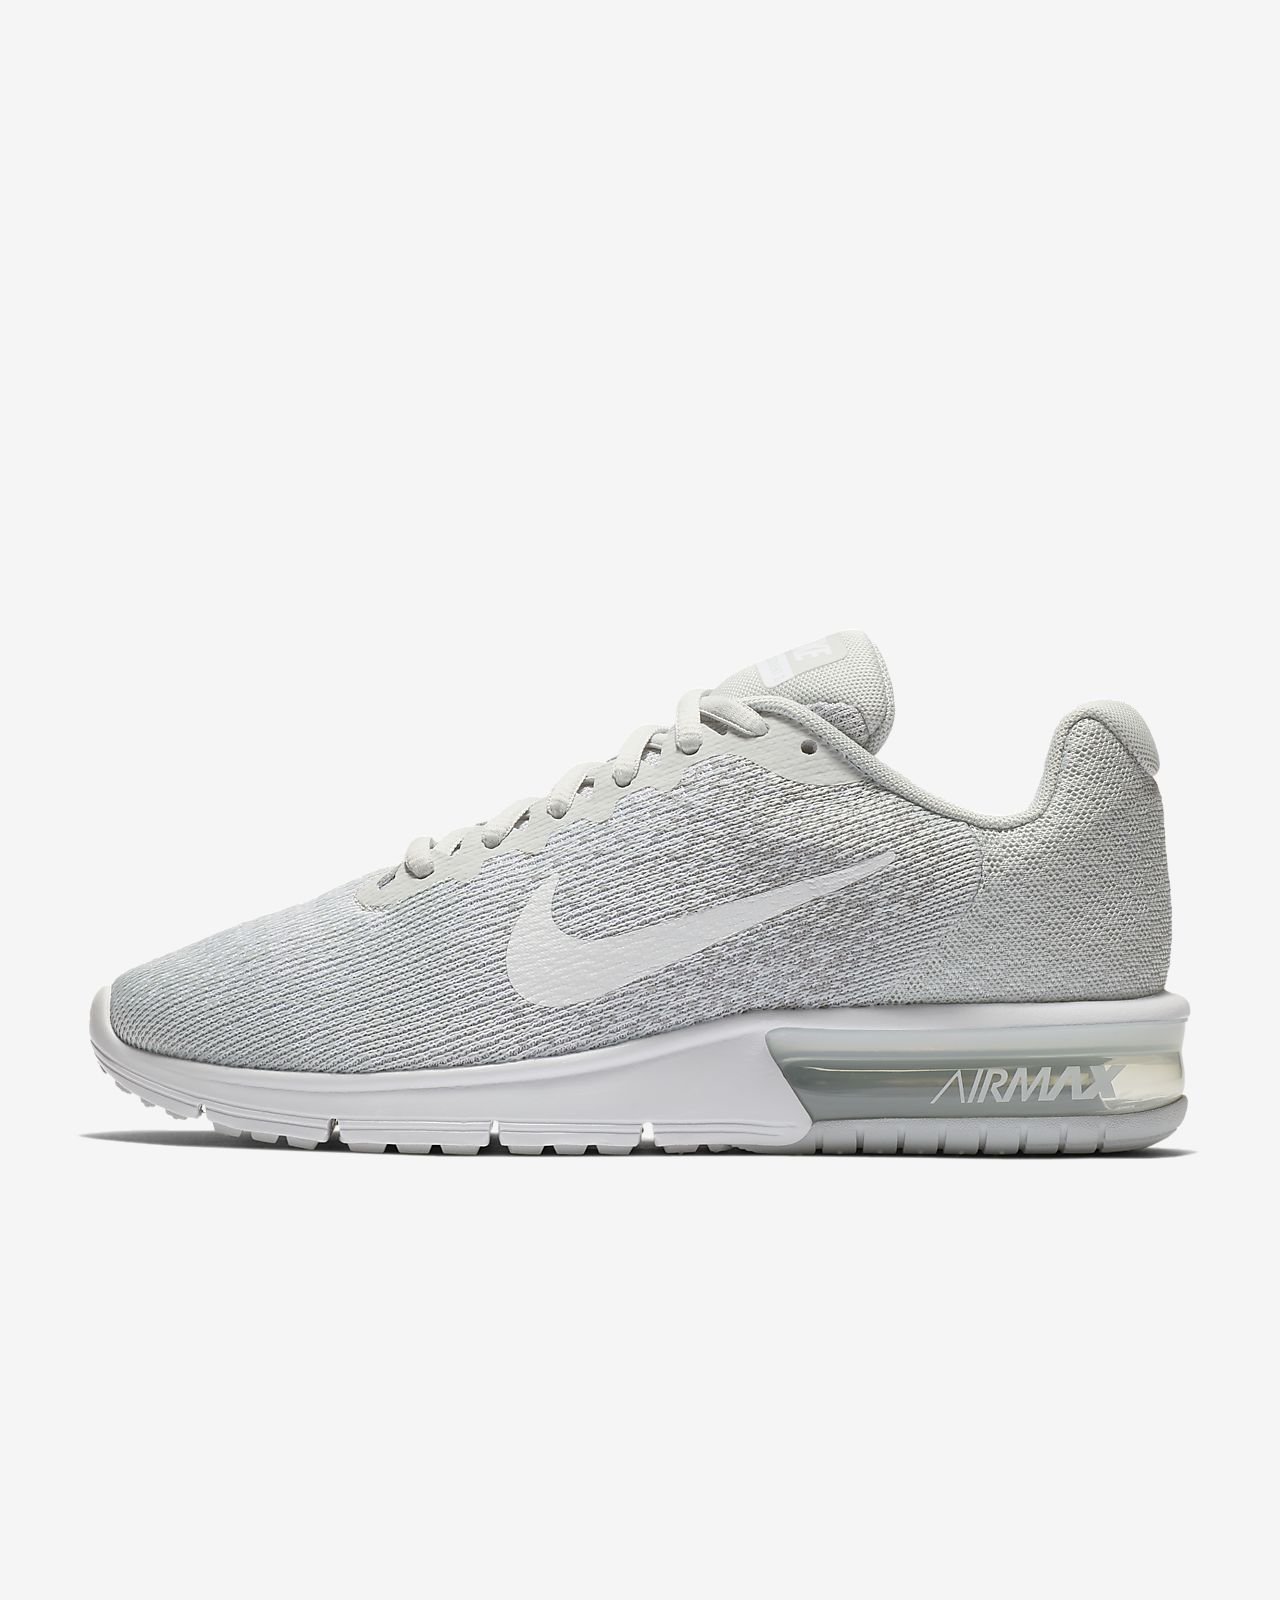 Chaussure Nike Air Max Sequent 2 pour Femme